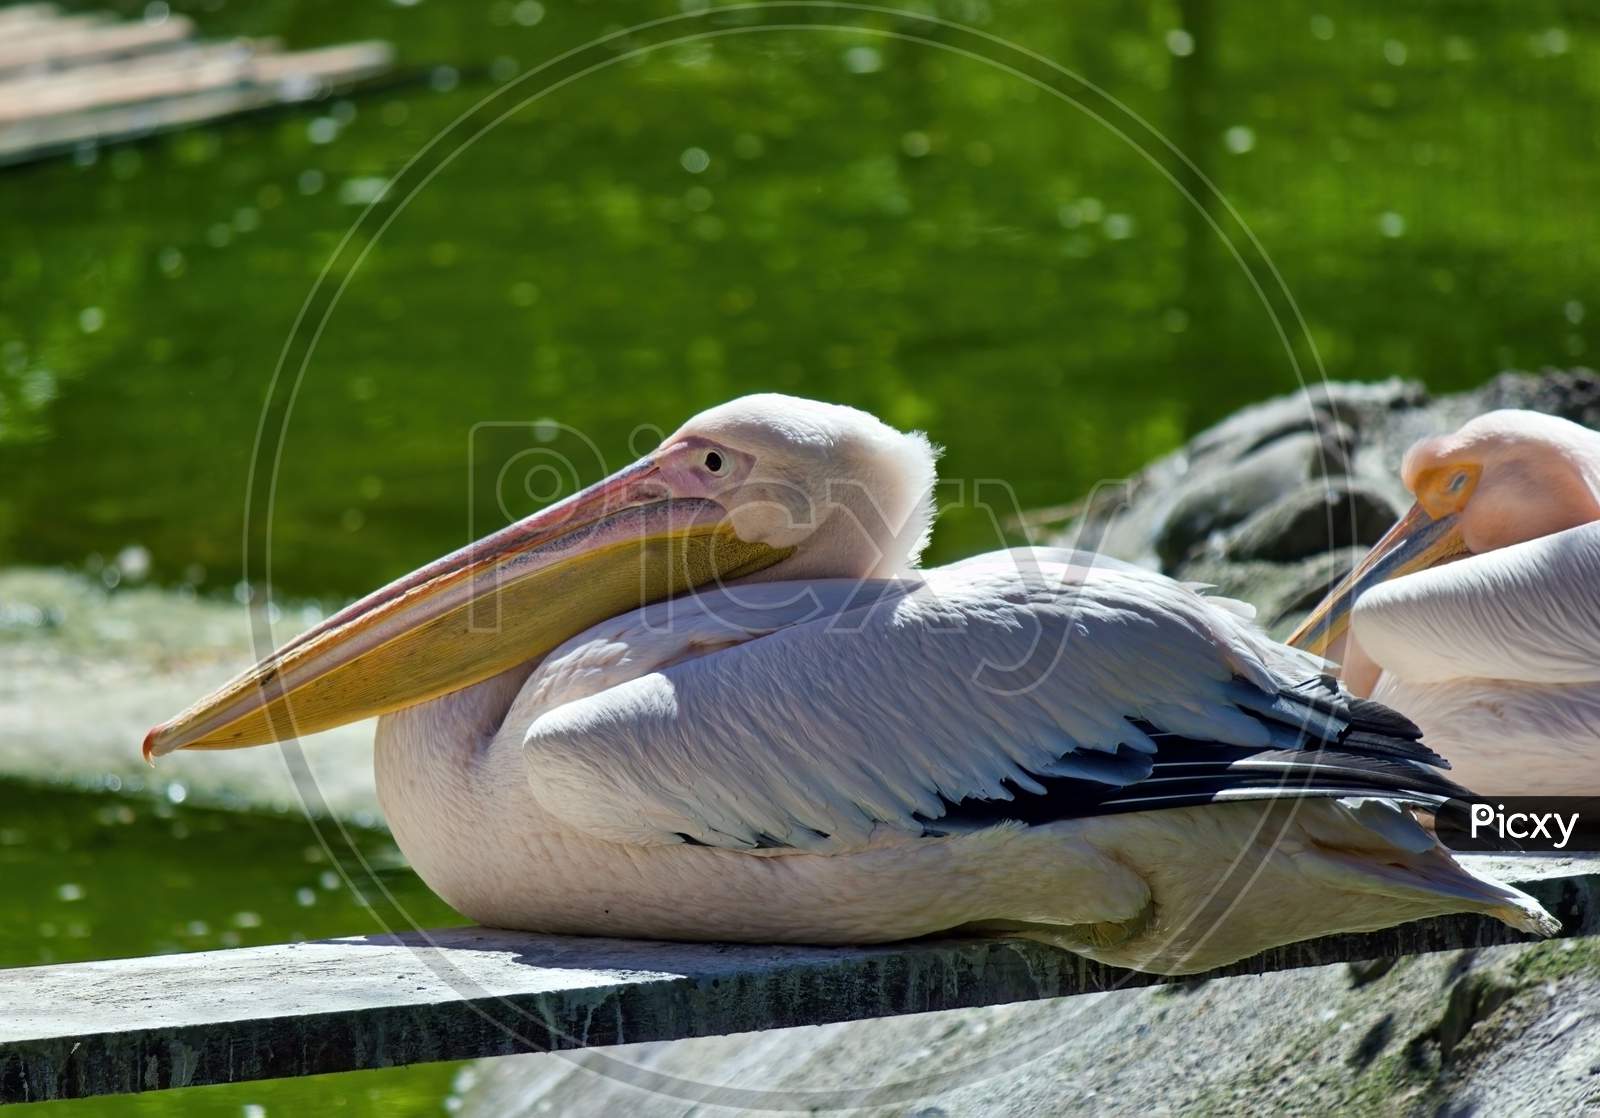 Great White Pelican (Pelecanus Onocrotalus) Sitting By A Pond In Sunlight During Daytime.